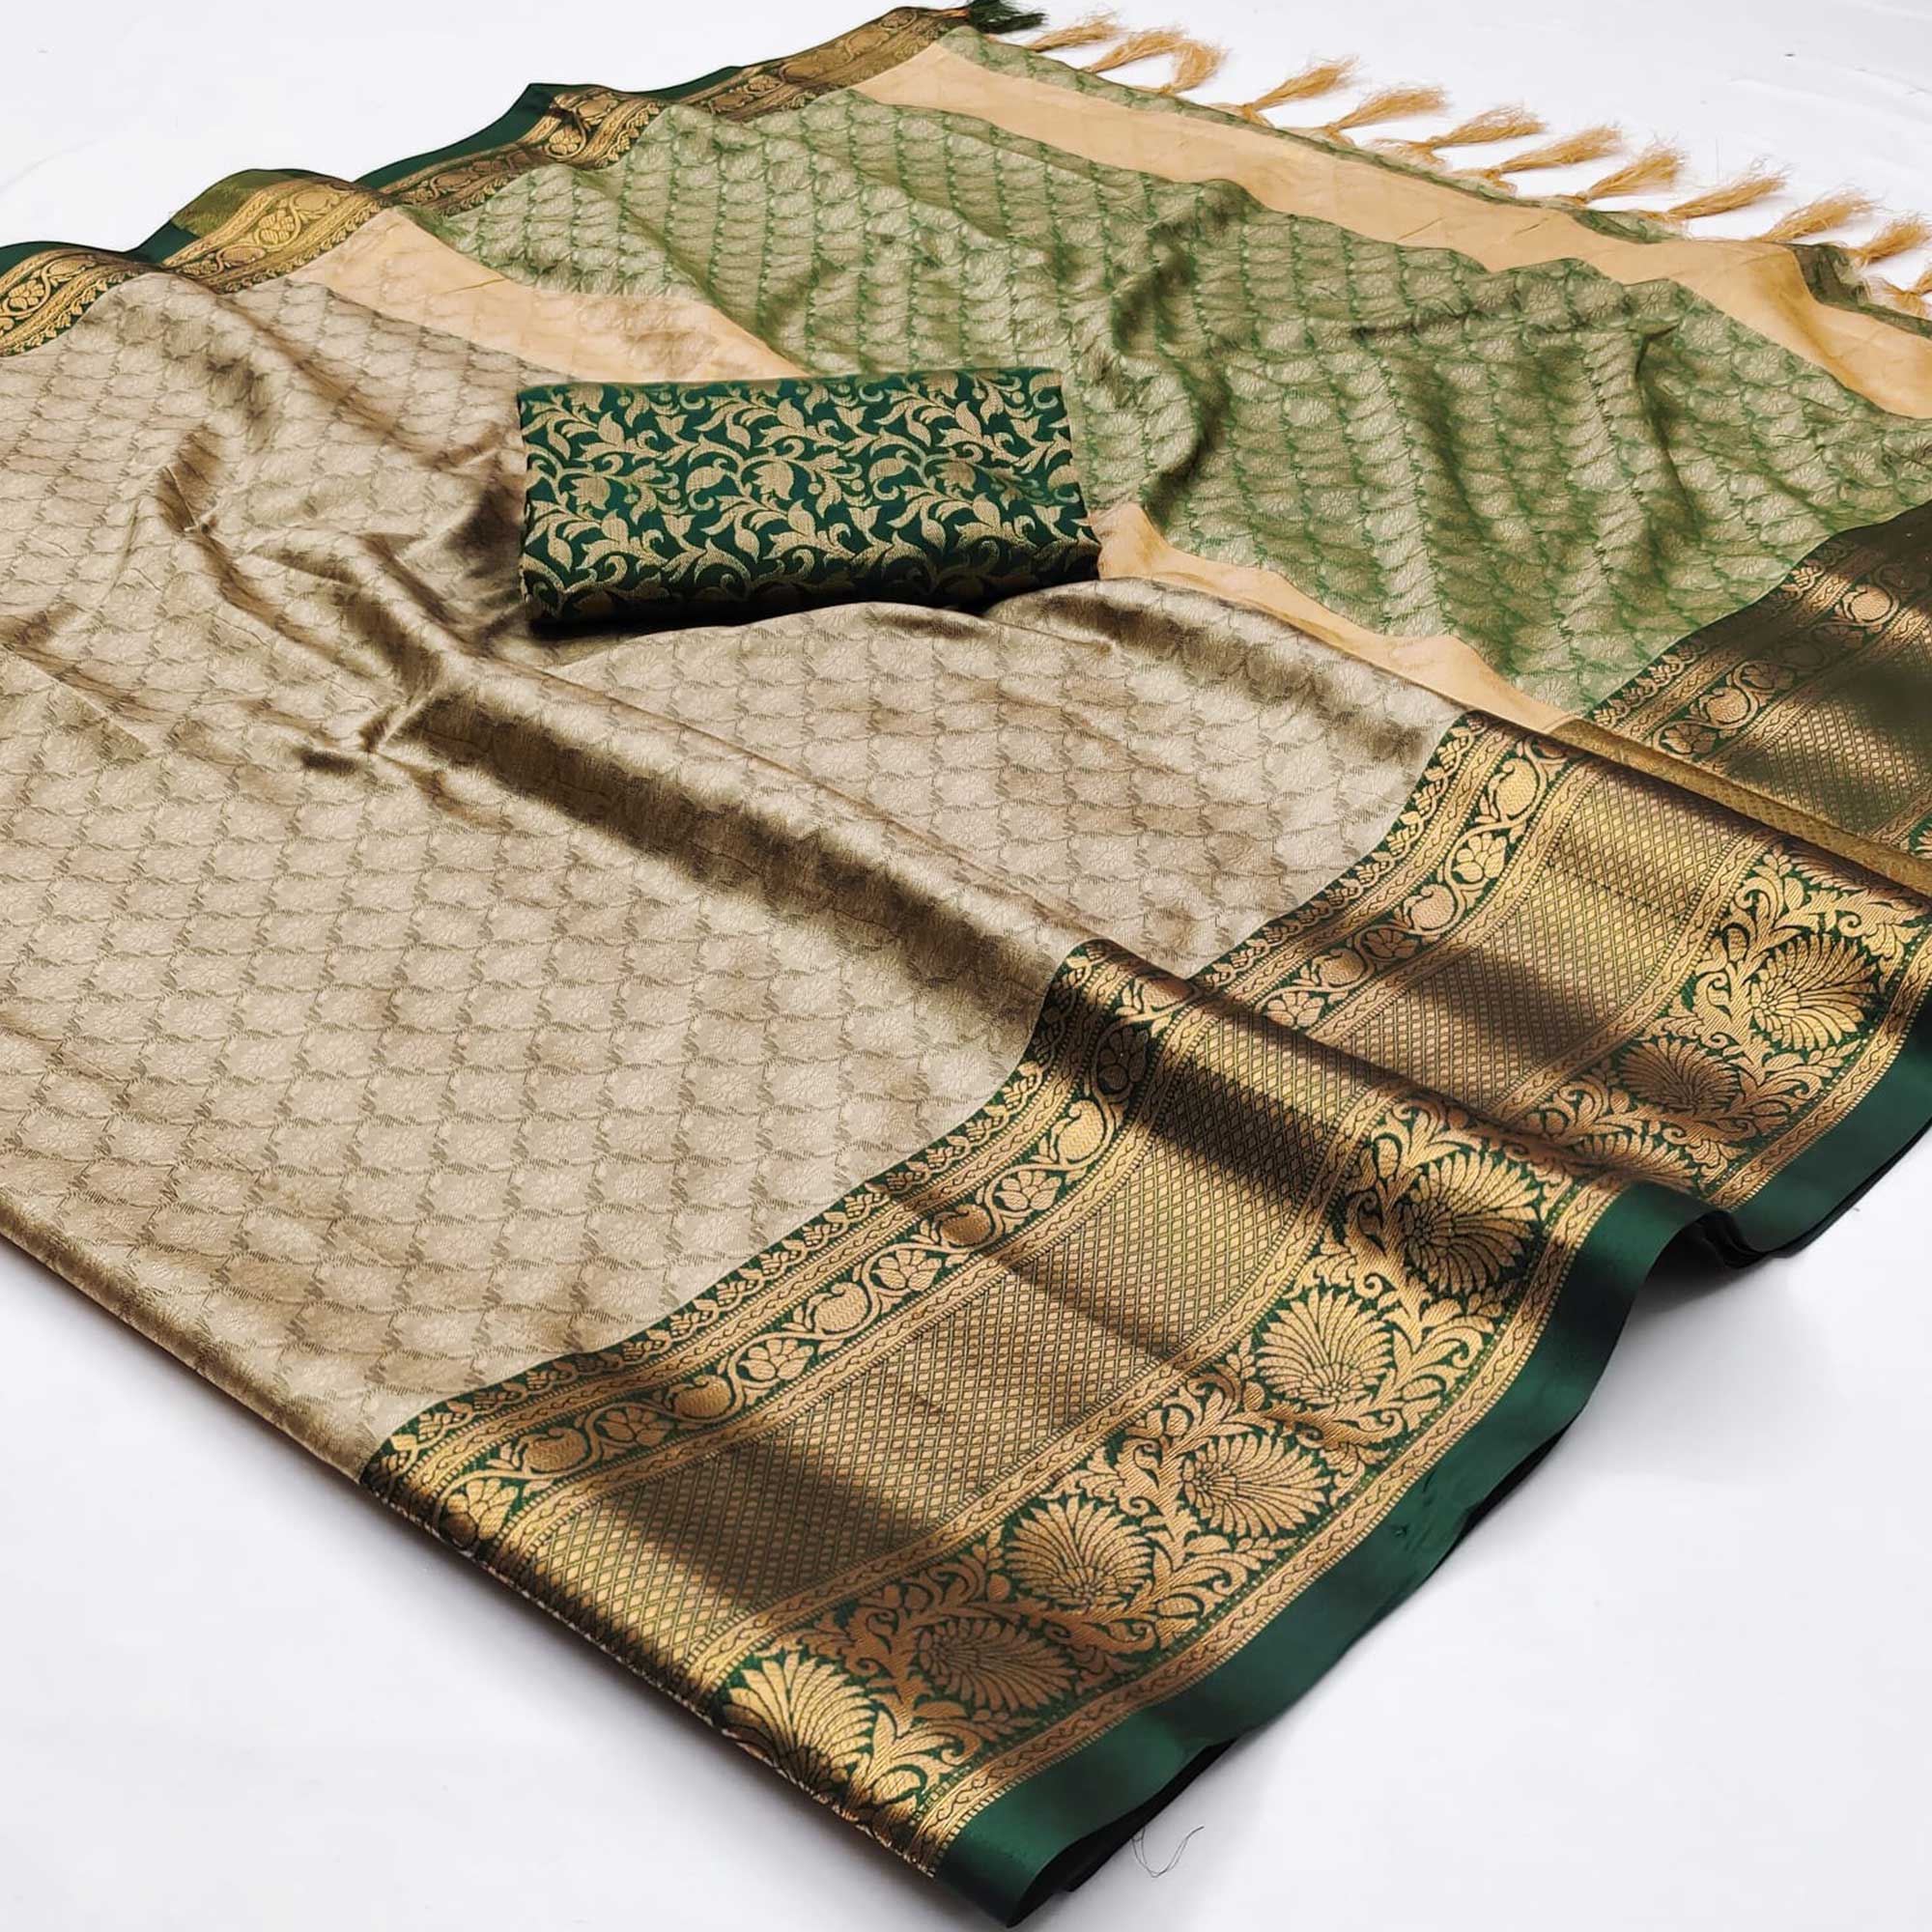 Chikoo Green Printed And Woven Cotton Silk Saree With Tassels